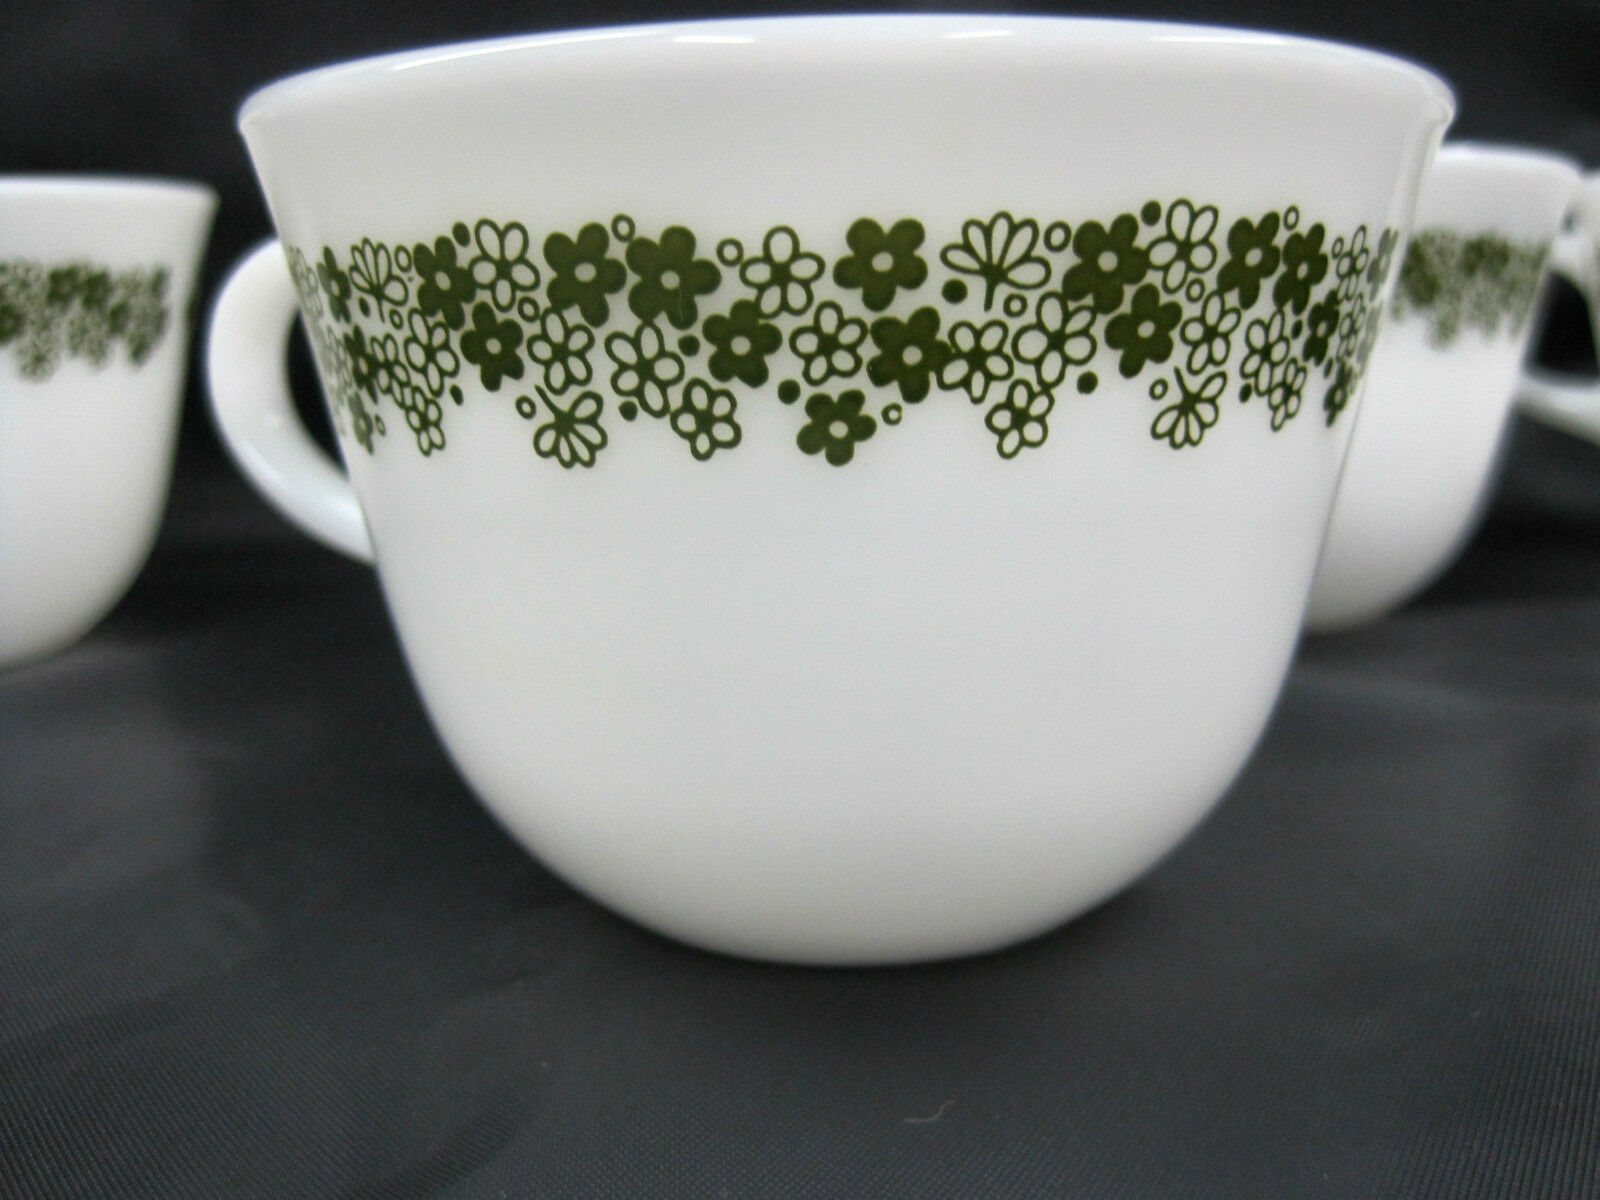 Primary image for 4 Corning Ware Cup Mug Milk Glass Crazy Daisy Spring Blossom Green White Vintage